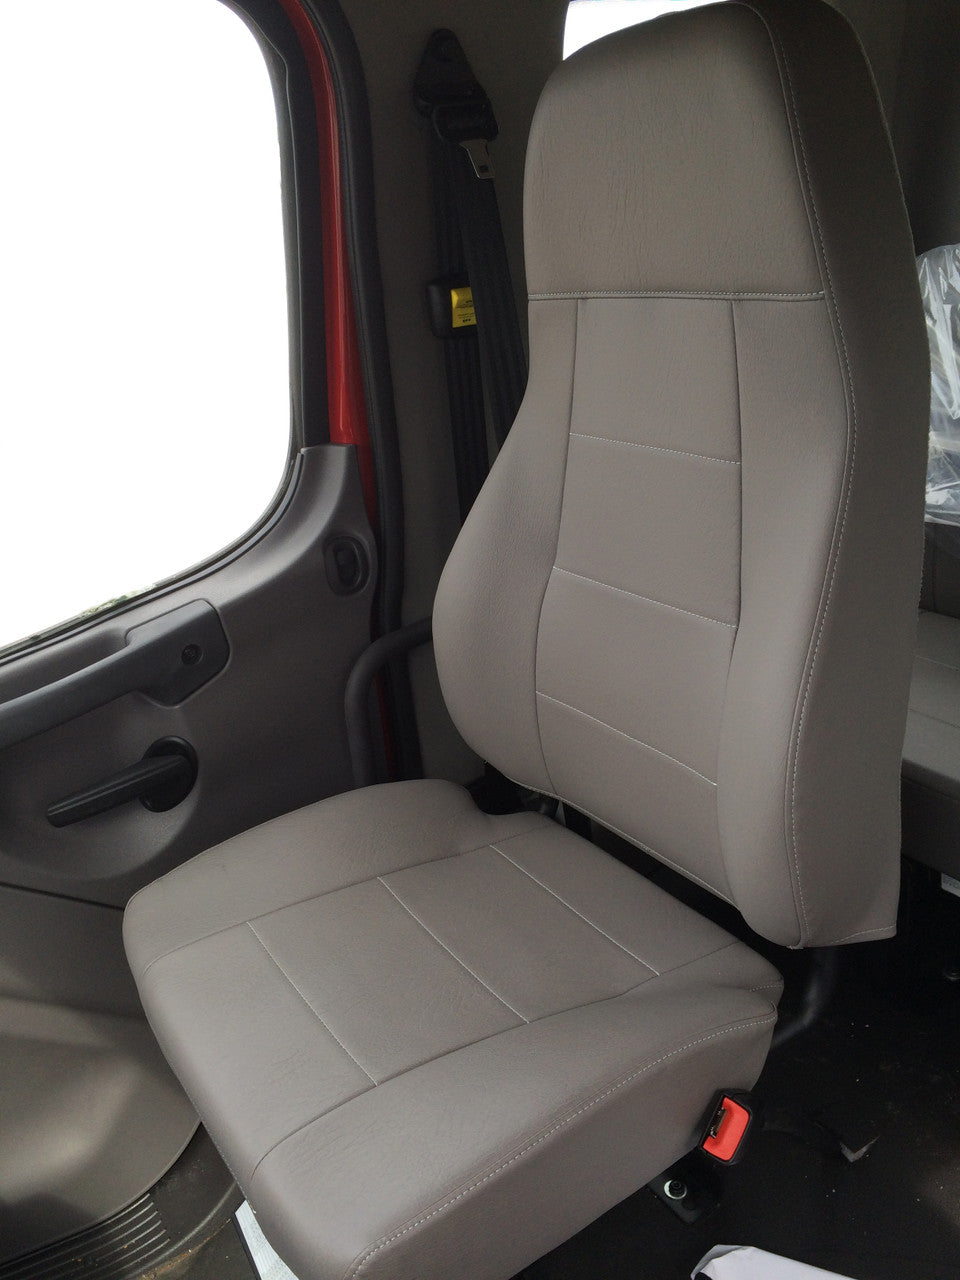 Ford Air Ride F650 and F750 seat with TigerTough seat covers.